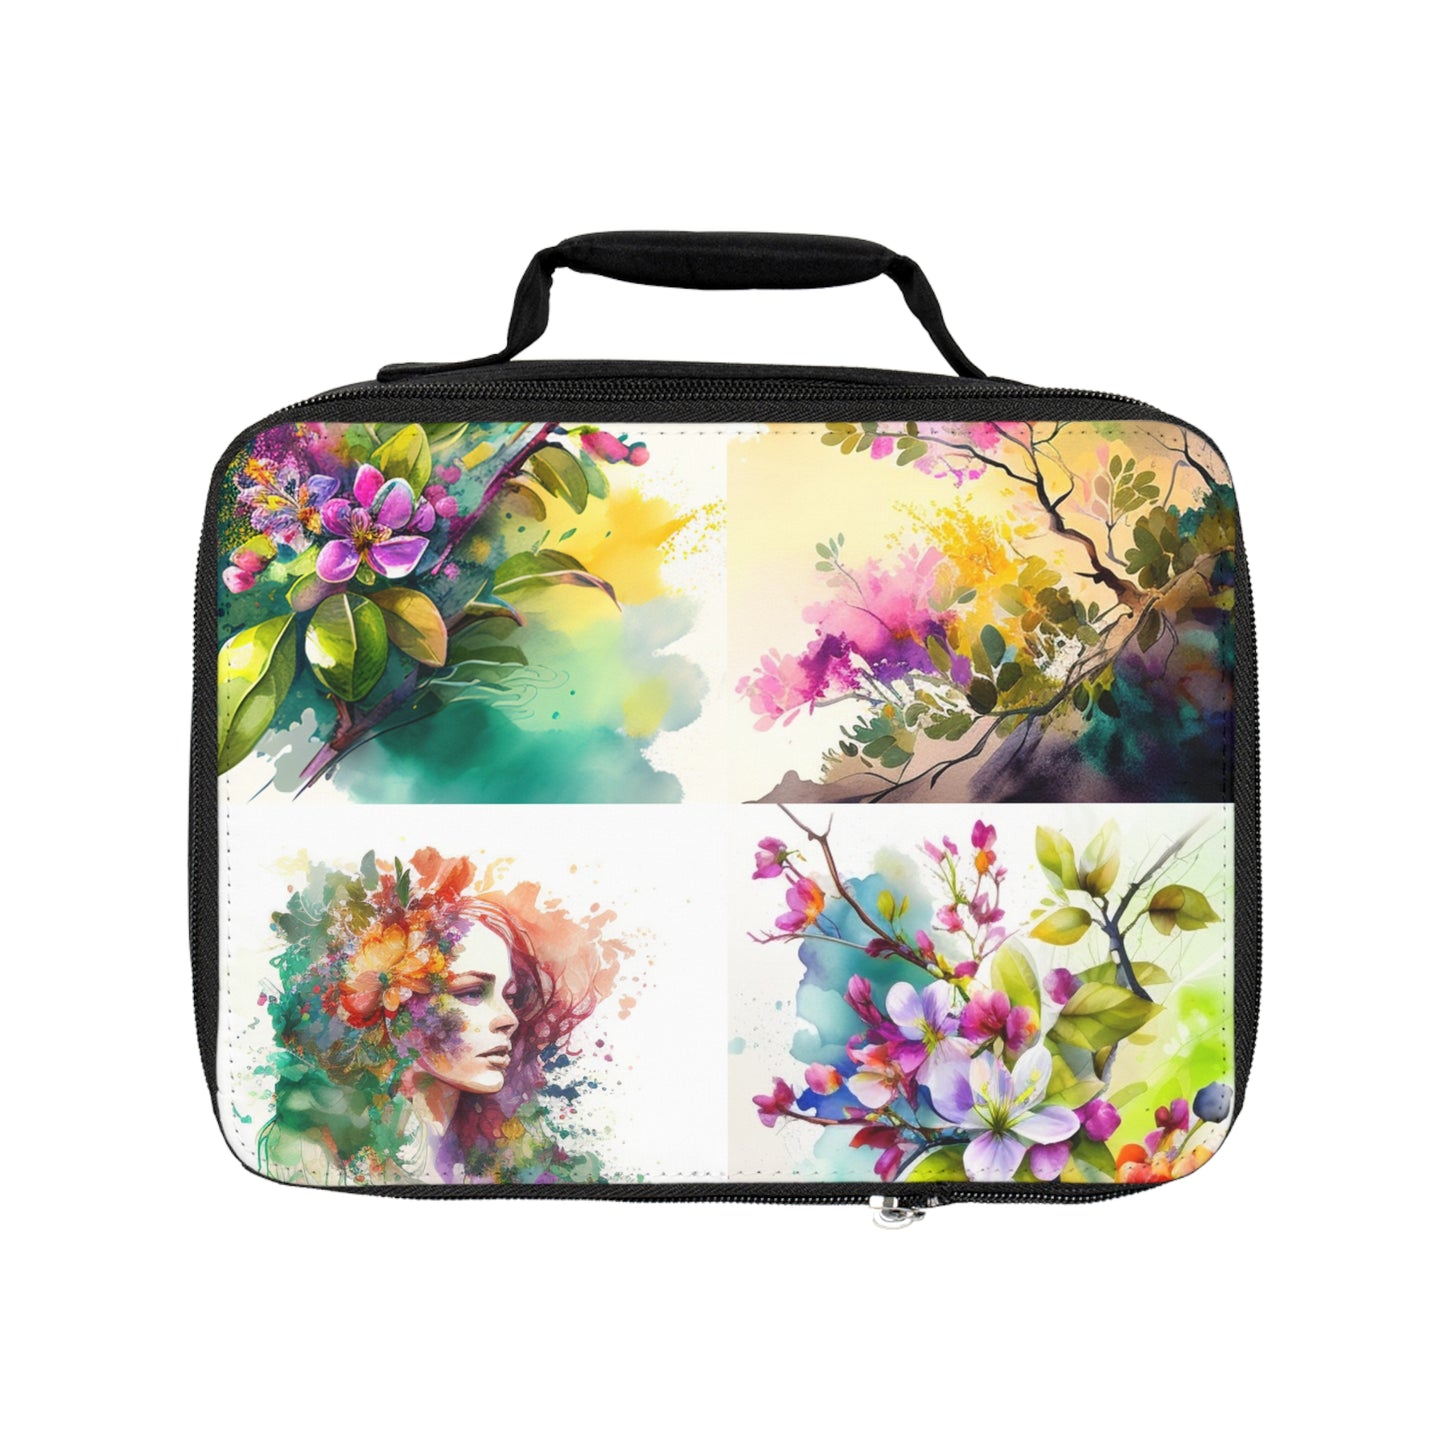 Lunch Bag Mother Nature Bright Spring Colors Realistic Watercolor 5